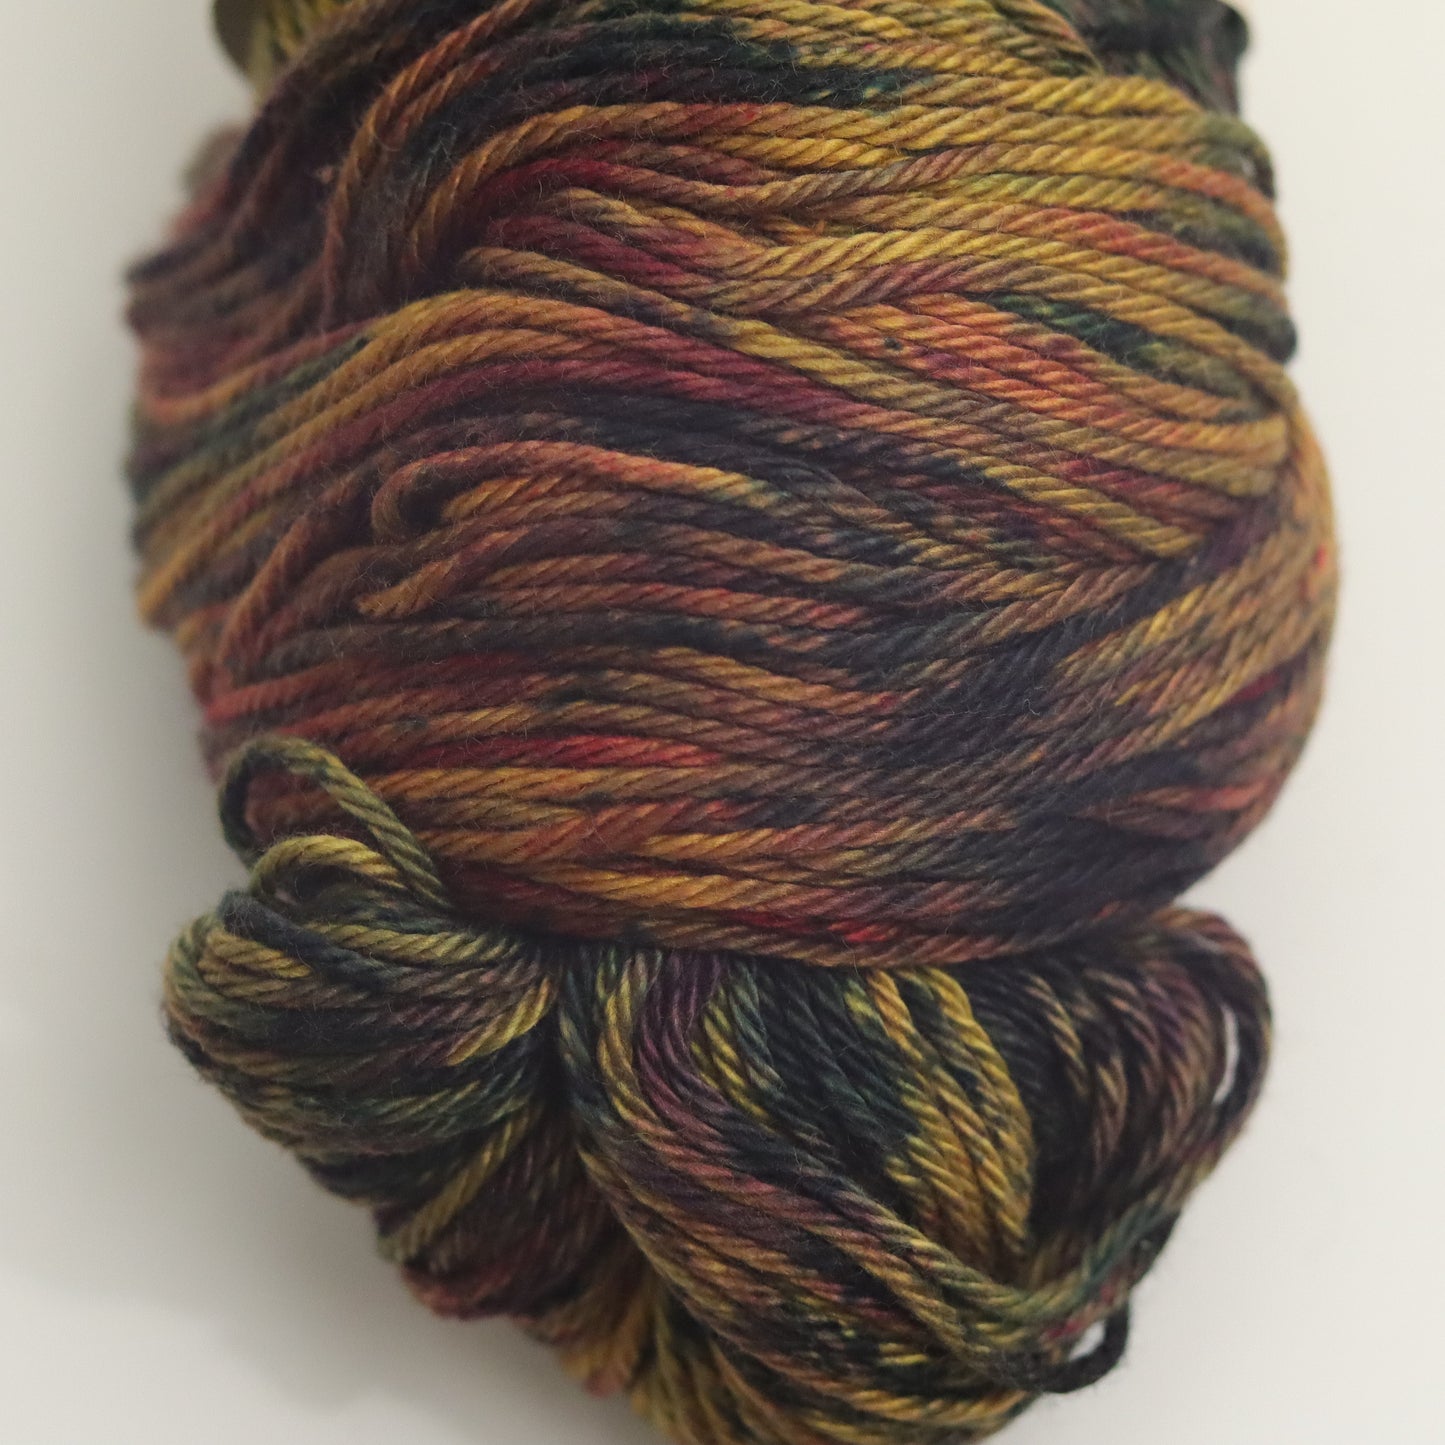 Peacock Yarn Light DK Cotton | Mad Scientist | Hand Dyed 100% Cotton Yarn